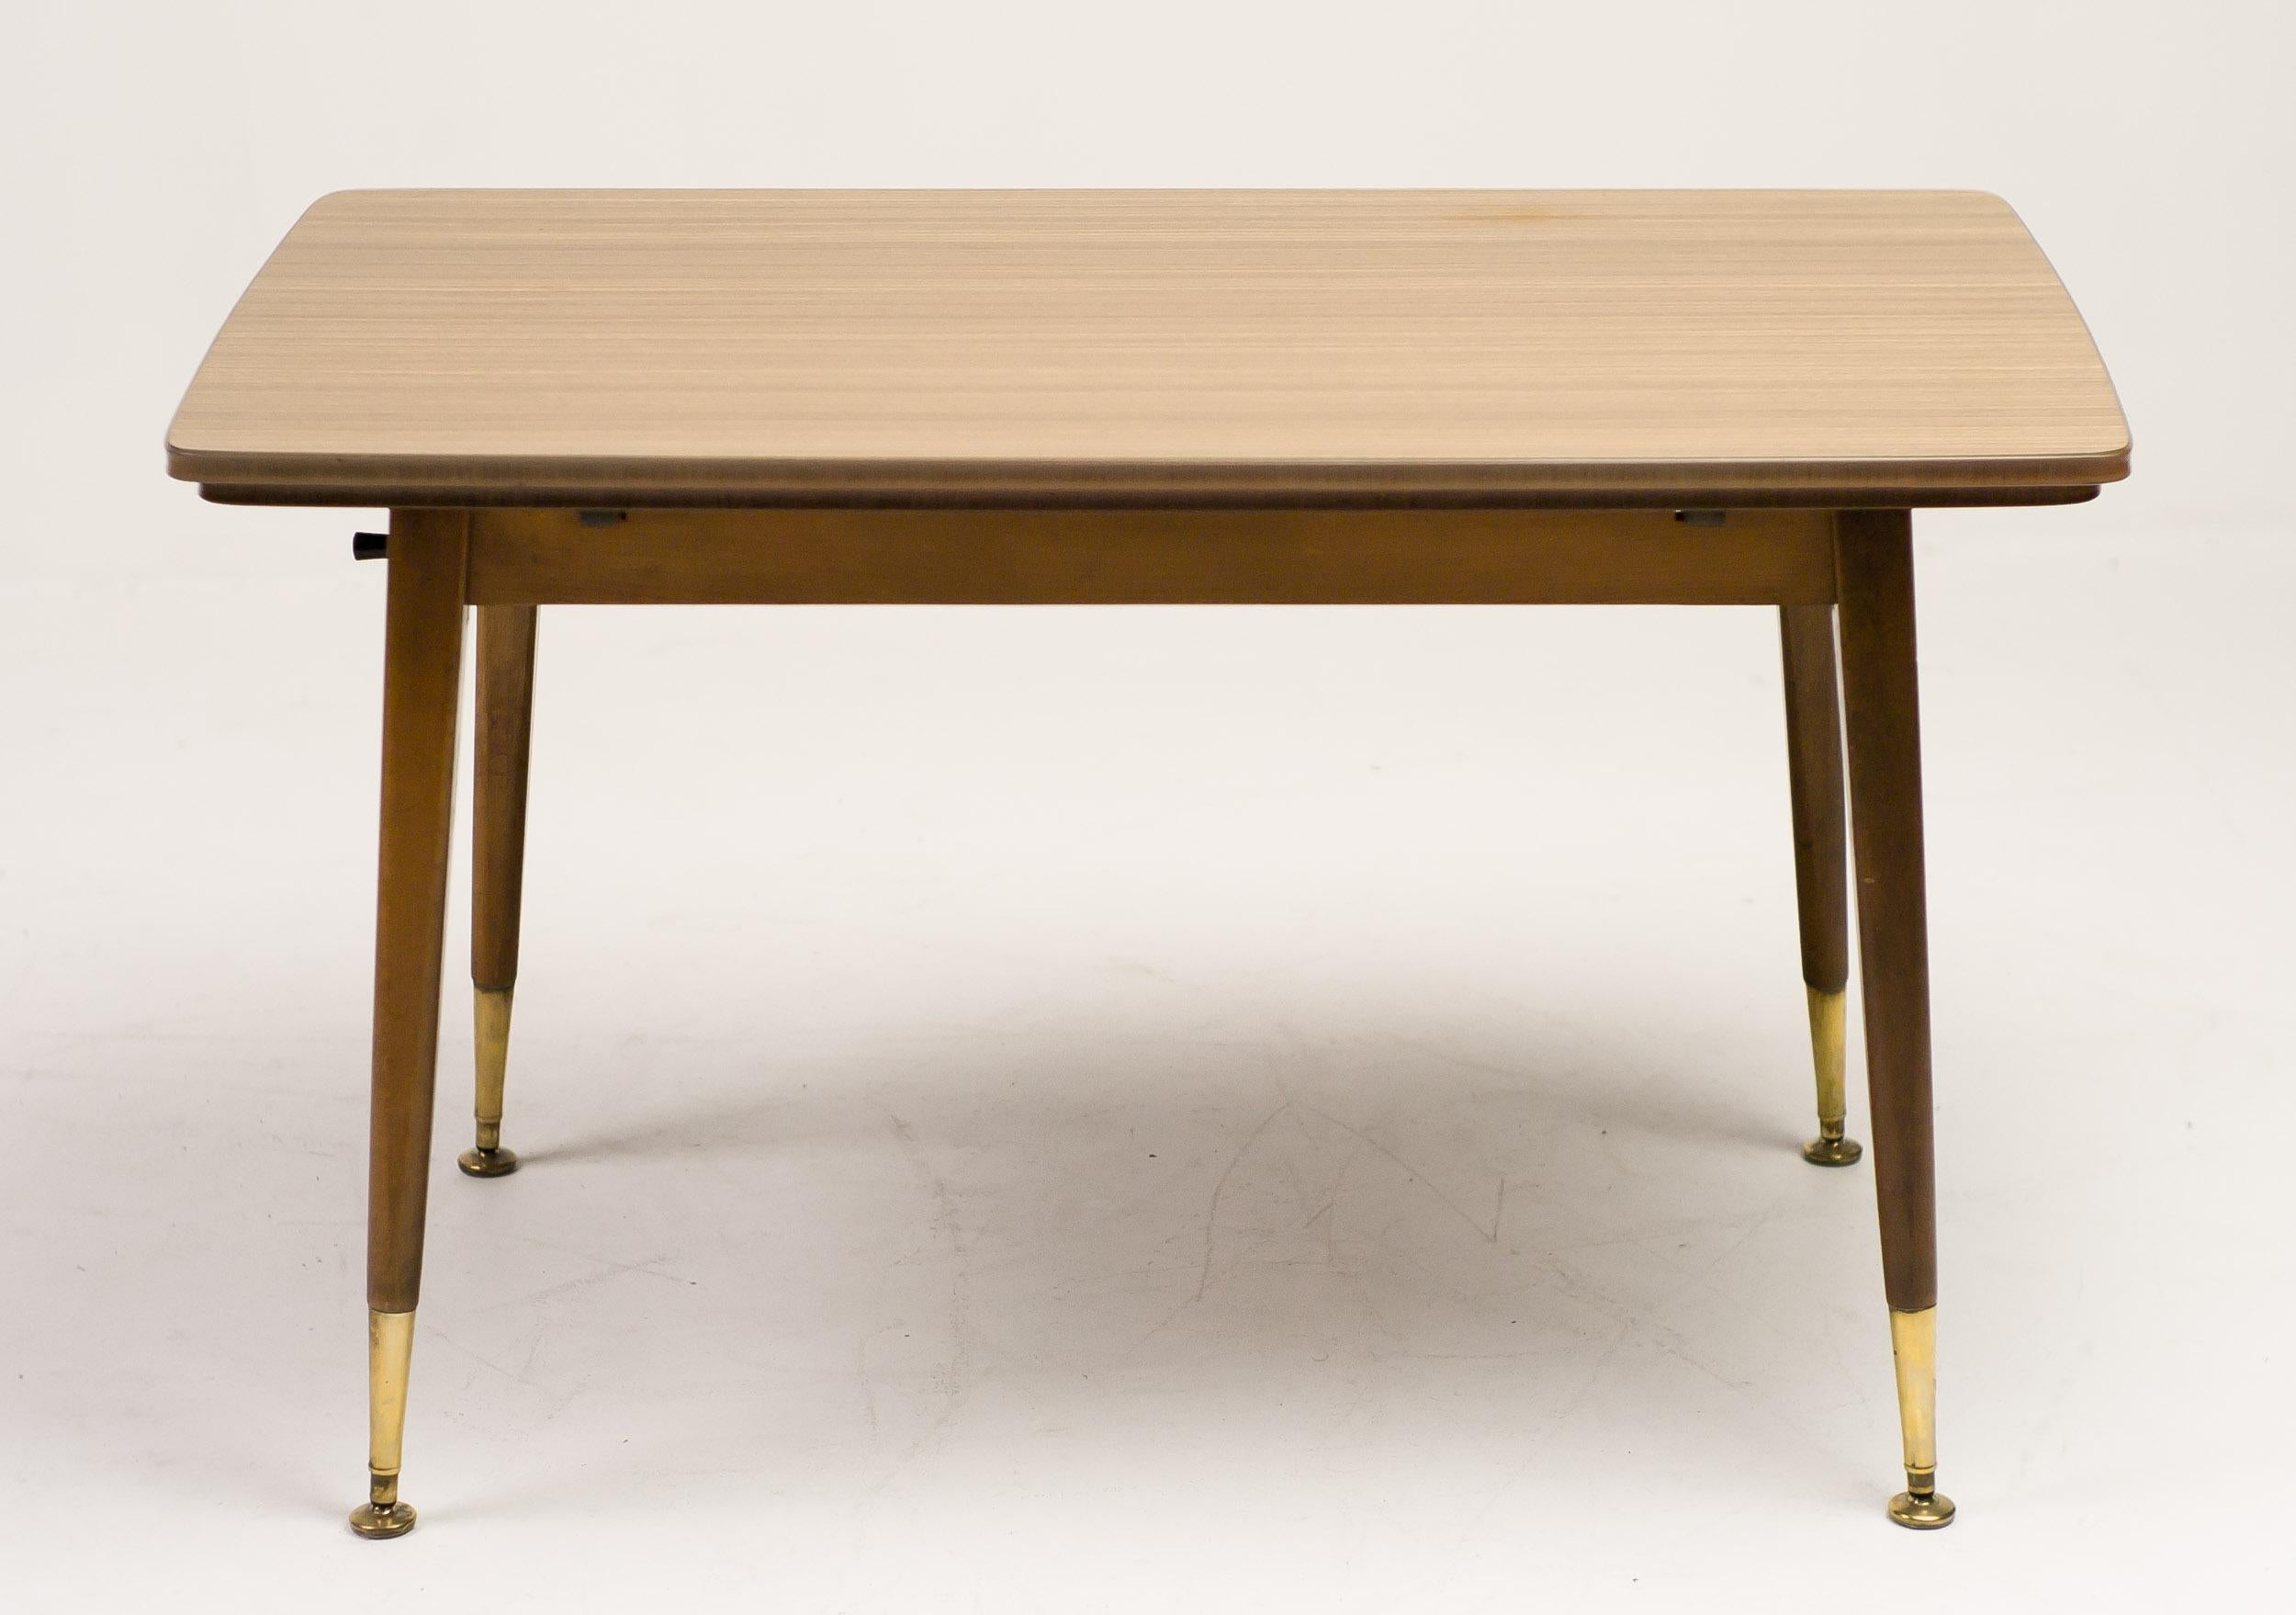 Remarkable Italian side table with a built in mechanism to extend the legs to dining height, and an extendable top.
The dimensions of the collapsed table are 109 long x 64 deep x 62 cm high.
The dimensions of the extended table are 109 long x 106